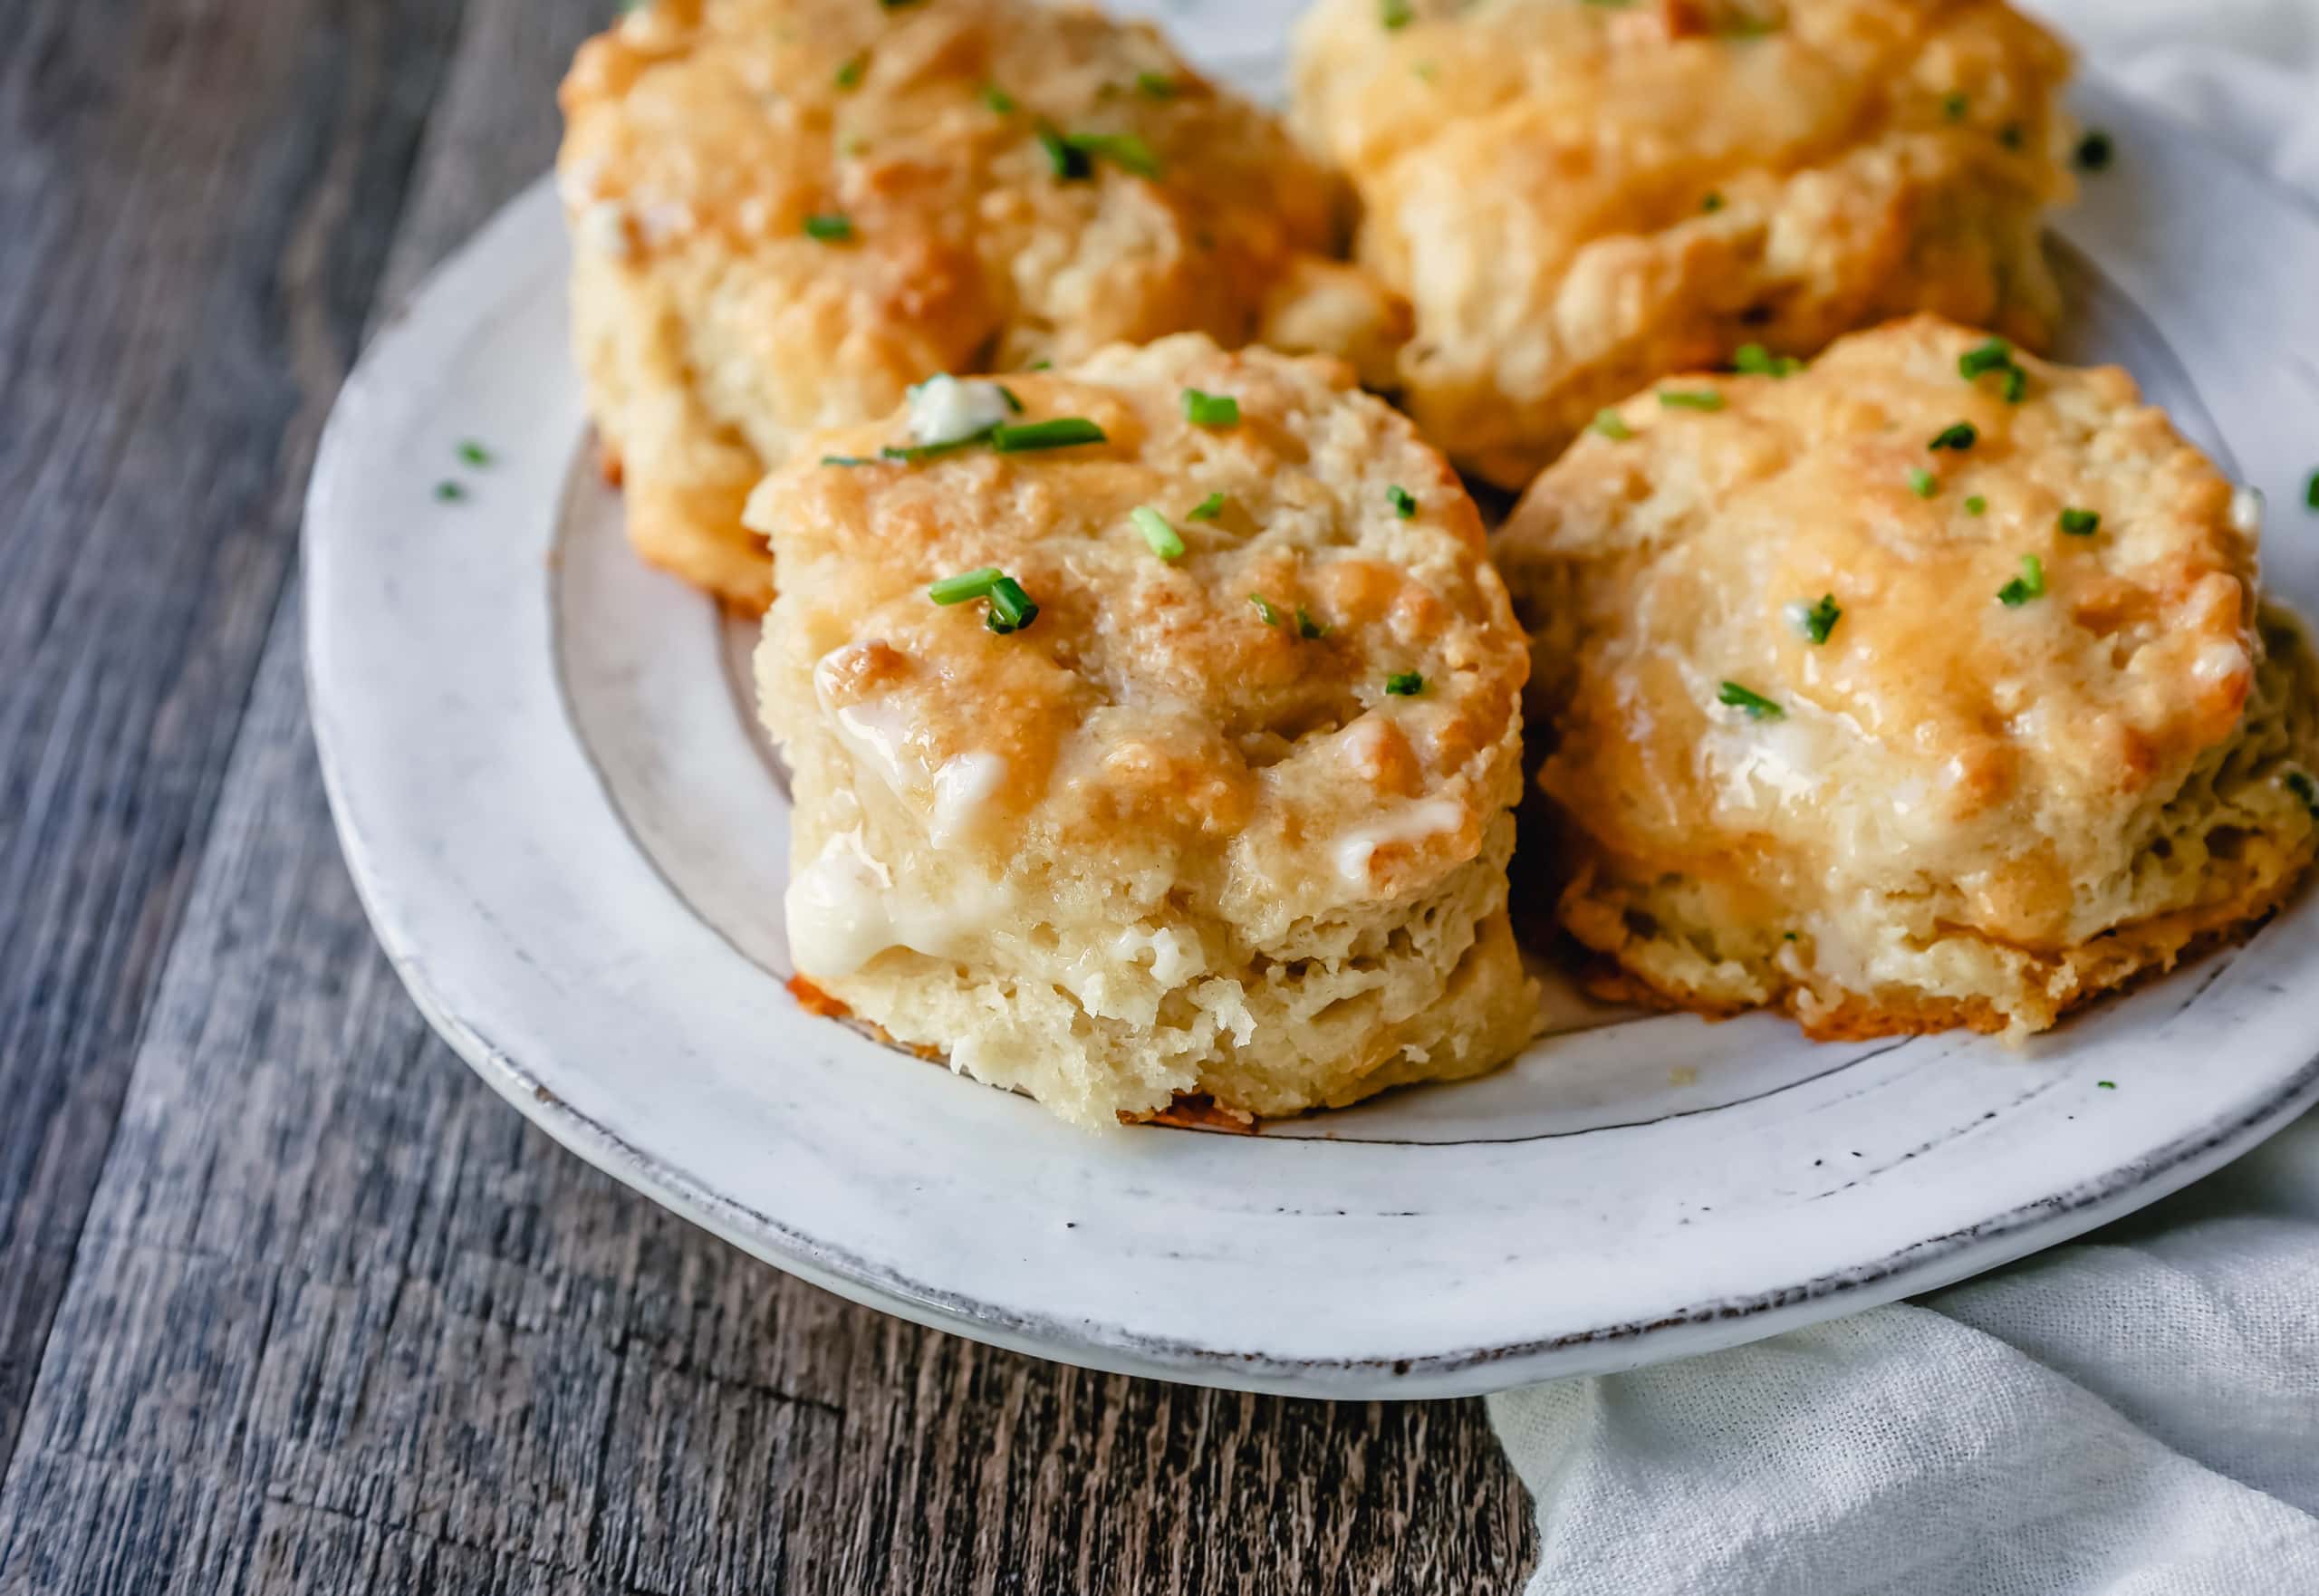 Homemade Cheesy Garlic Biscuits Light, fluffy, buttery homemade biscuits with cheddar cheese and garlic. These are the perfect homemade biscuit!